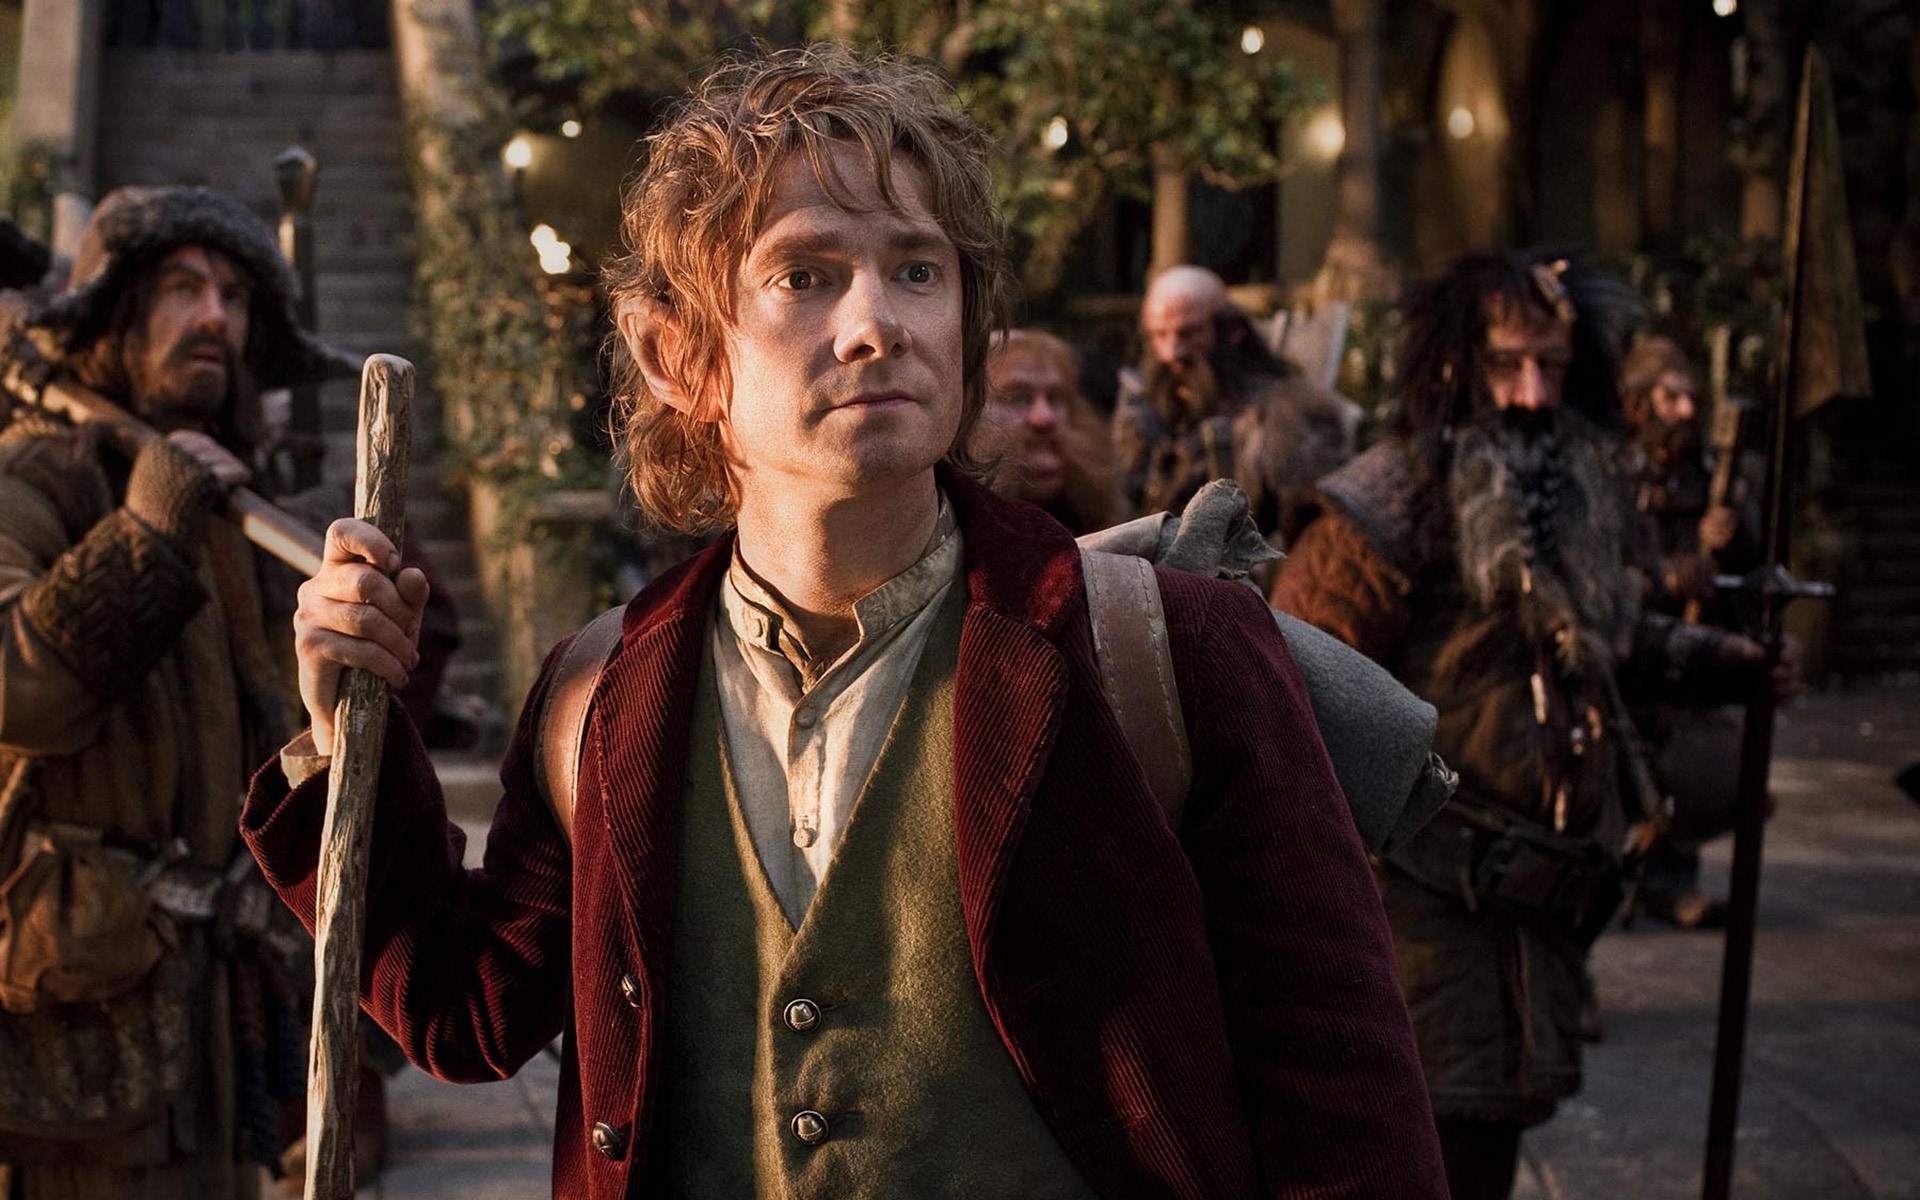 The Hobbit: An Unexpected Journey HD wallpapers #3 - 1920x1200